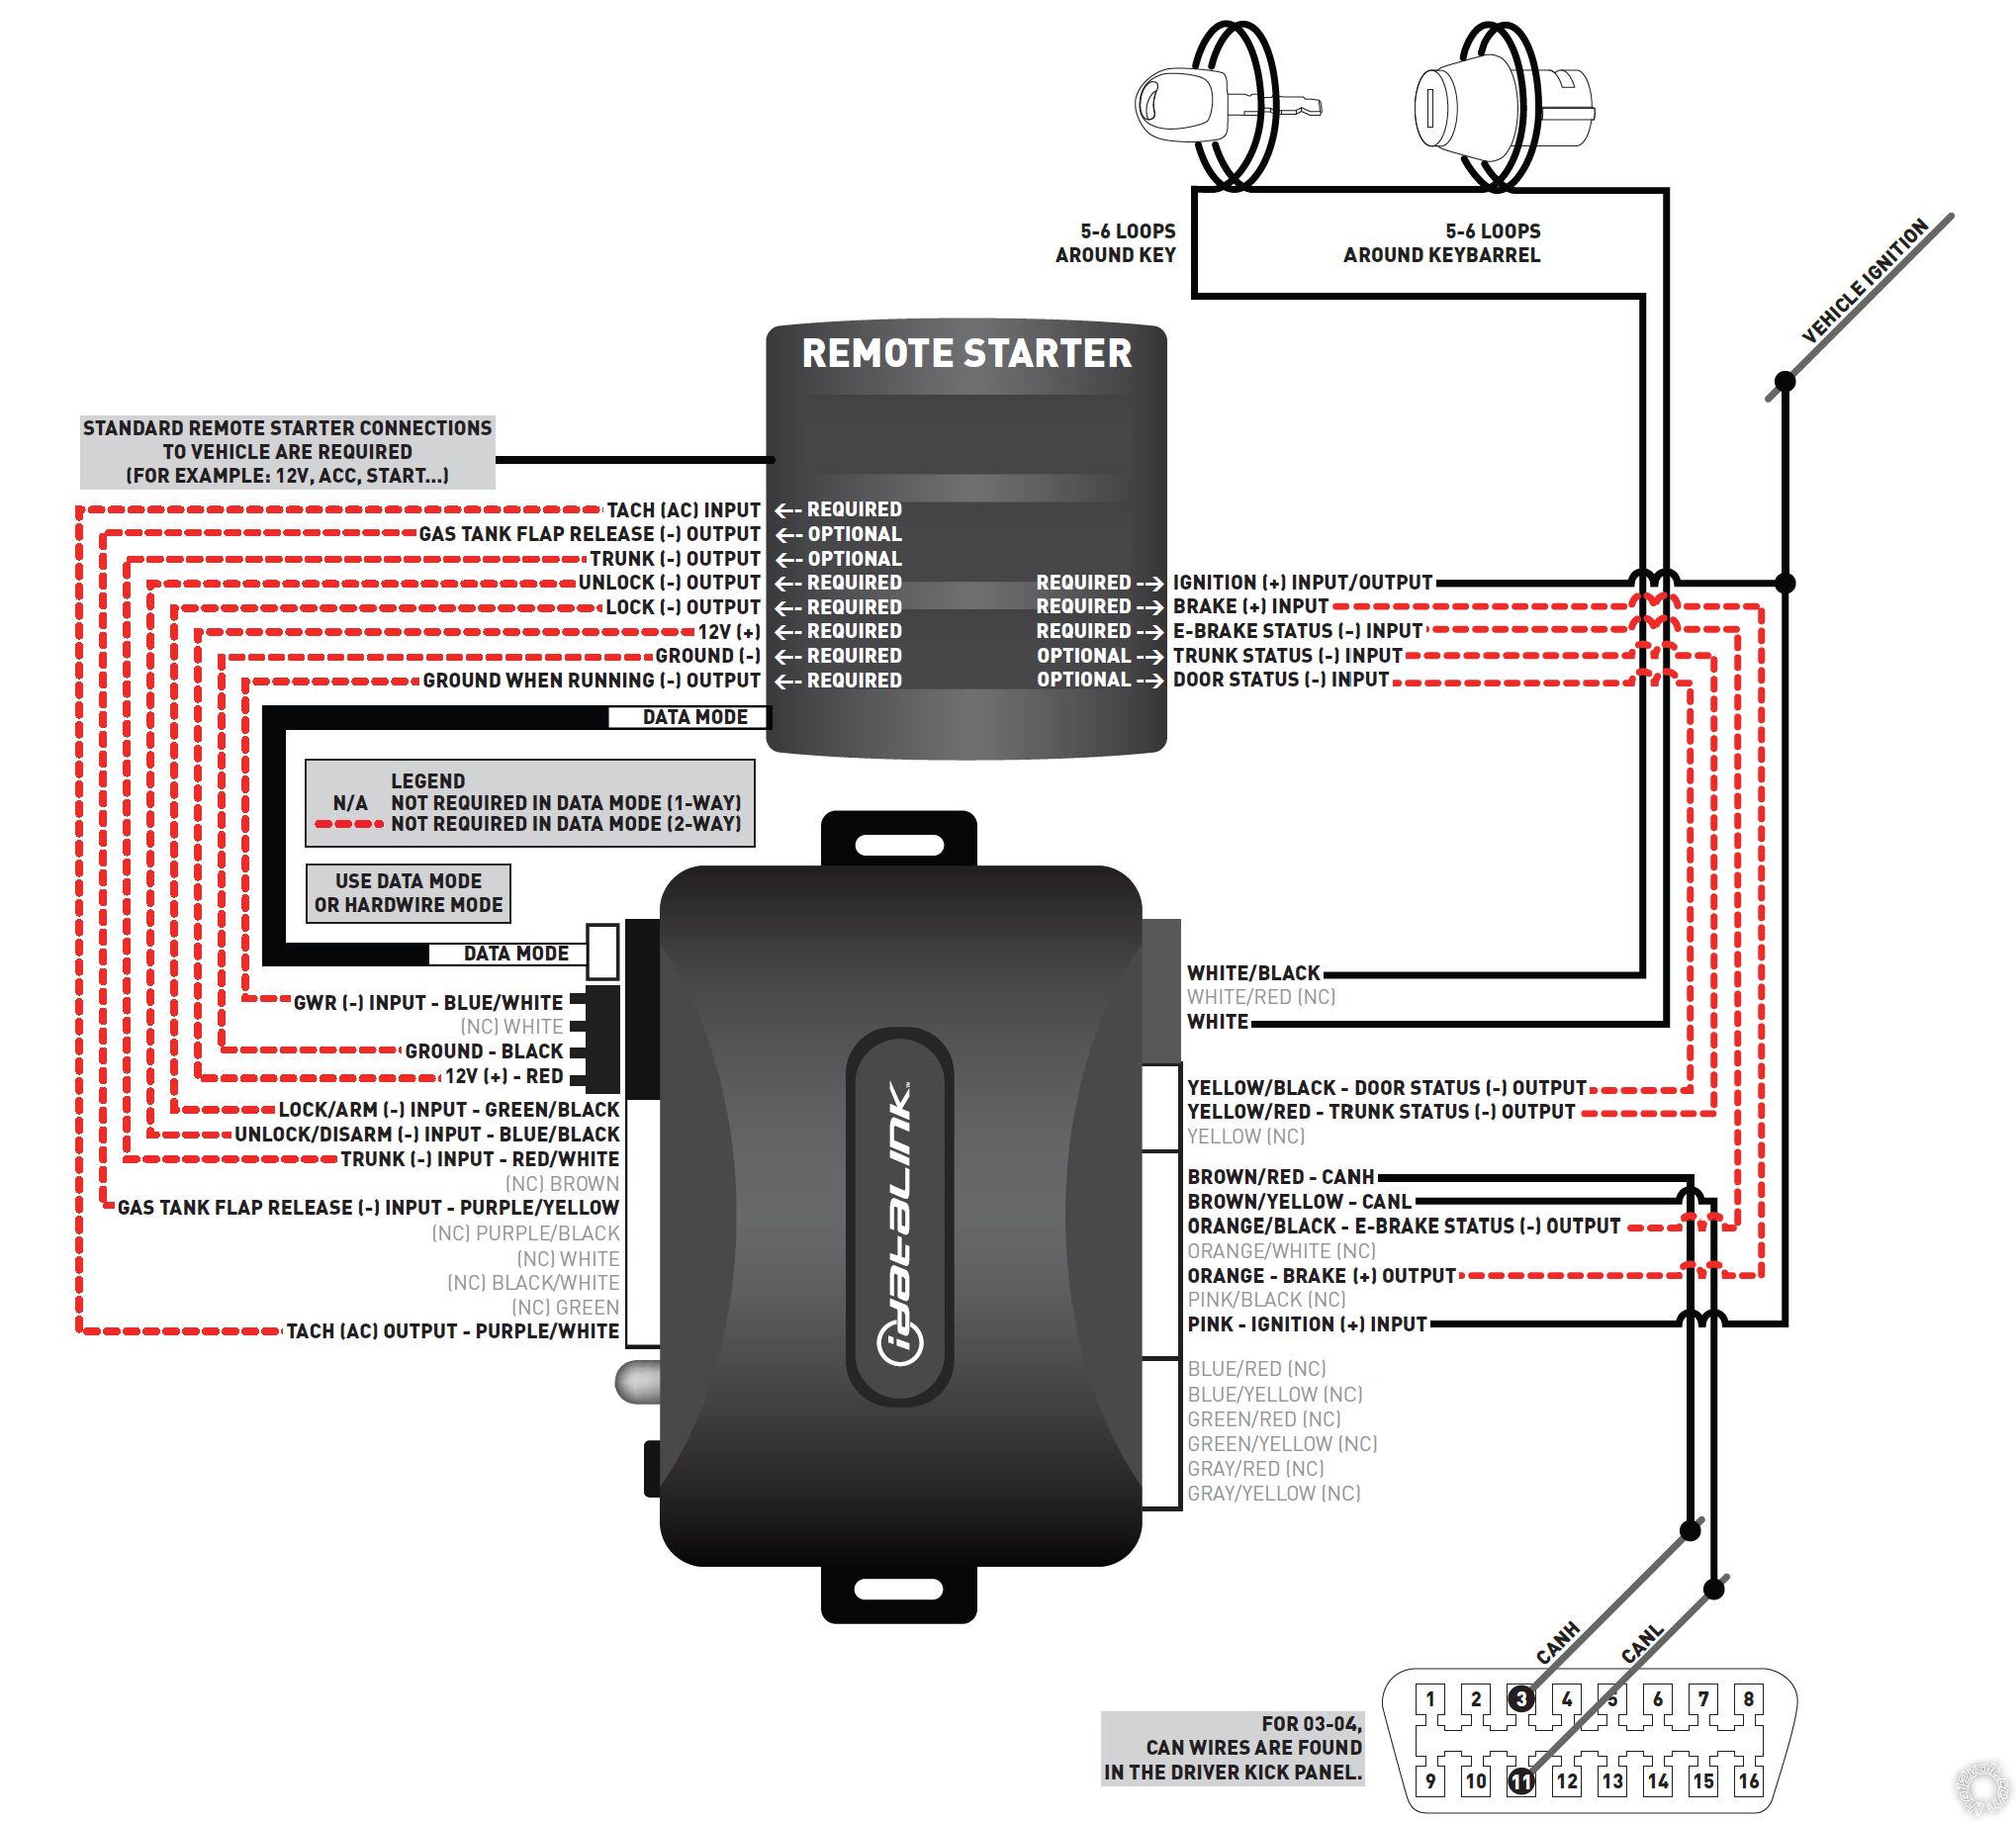 Spy LC095A Remote Starter, Volvo XC90 -- posted image.